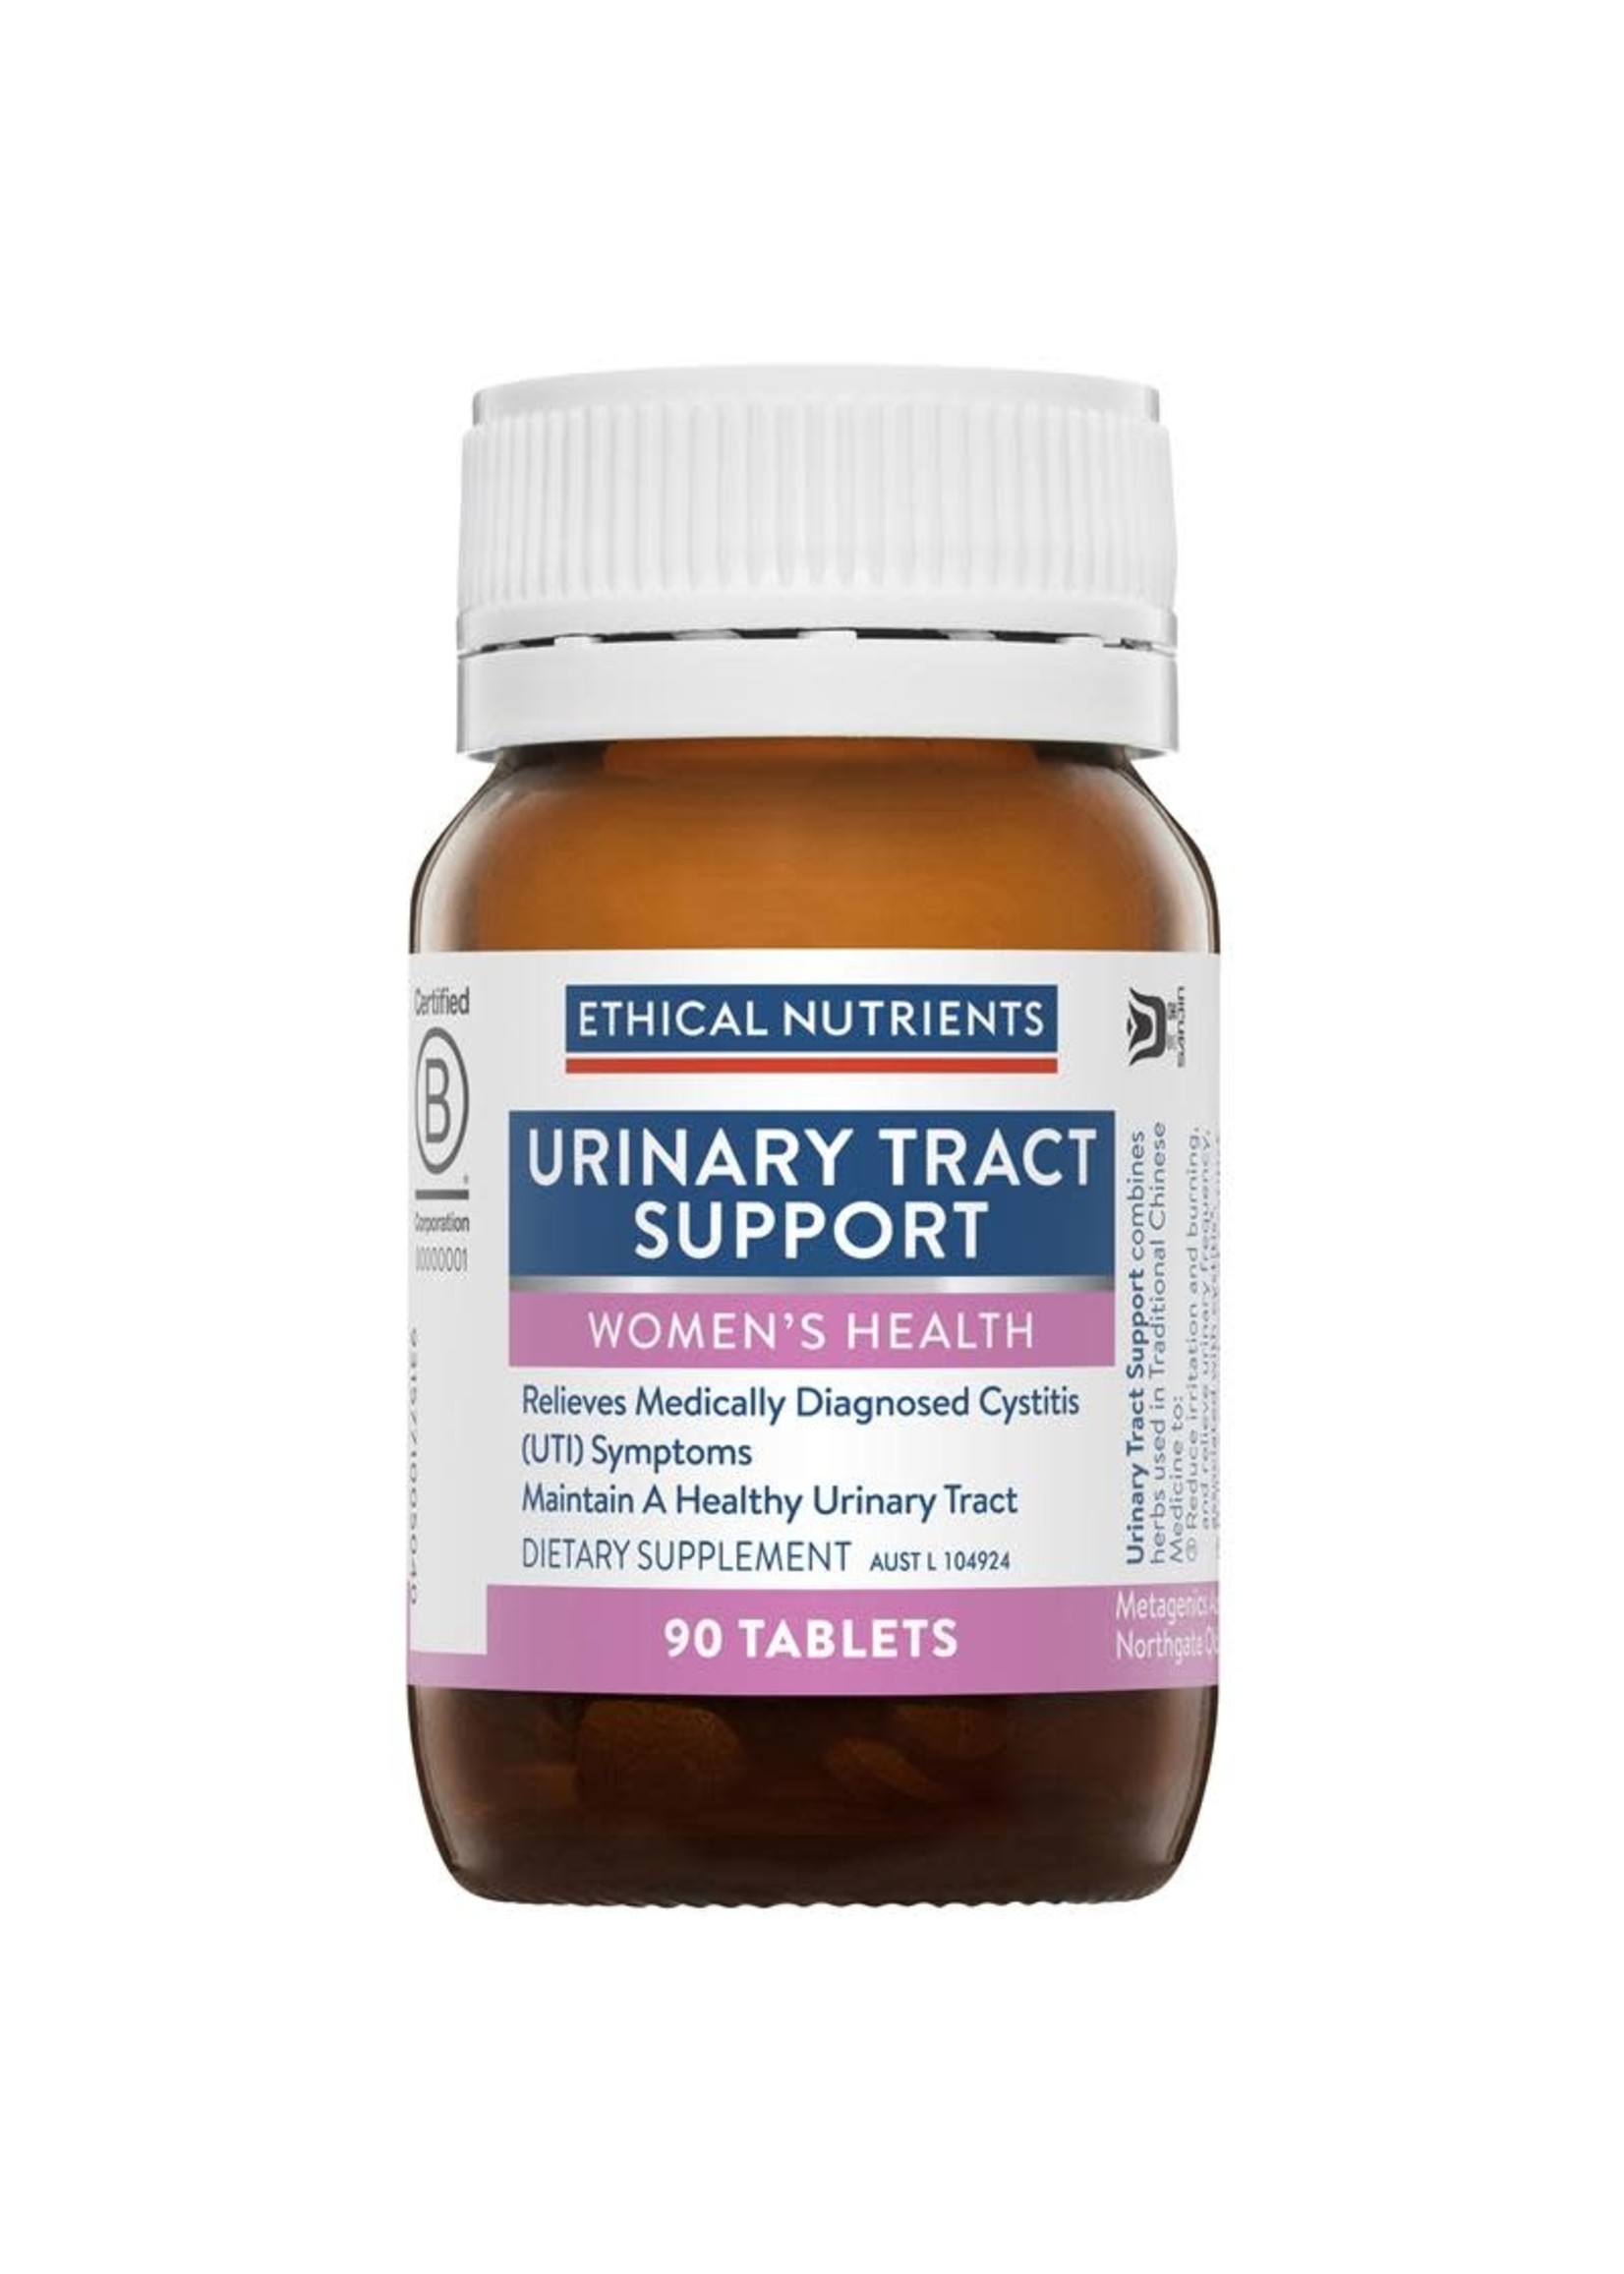 ETHICAL NUTRIENTS Ethical Nutrients Urinary Tract Support 90 tabs